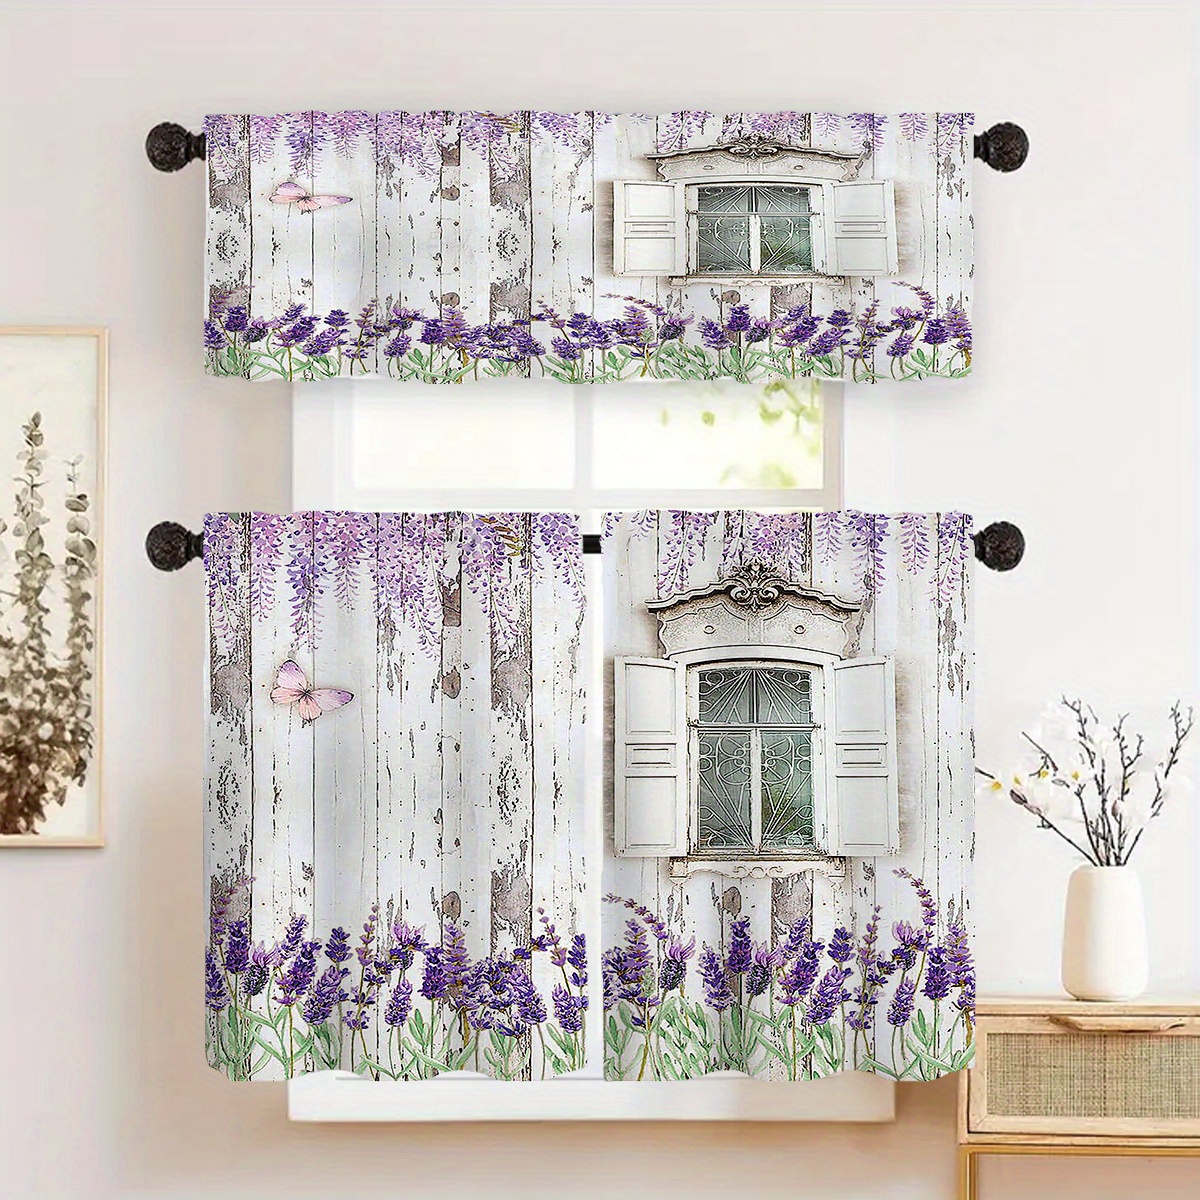 

Lavender Butterfly Sheer Curtain - Rod Pocket Design For Easy Hanging, Perfect For Living Room, Bedroom, Kitchen & More - Washable Polyester, Rustic Style, 1pc/2pc Set